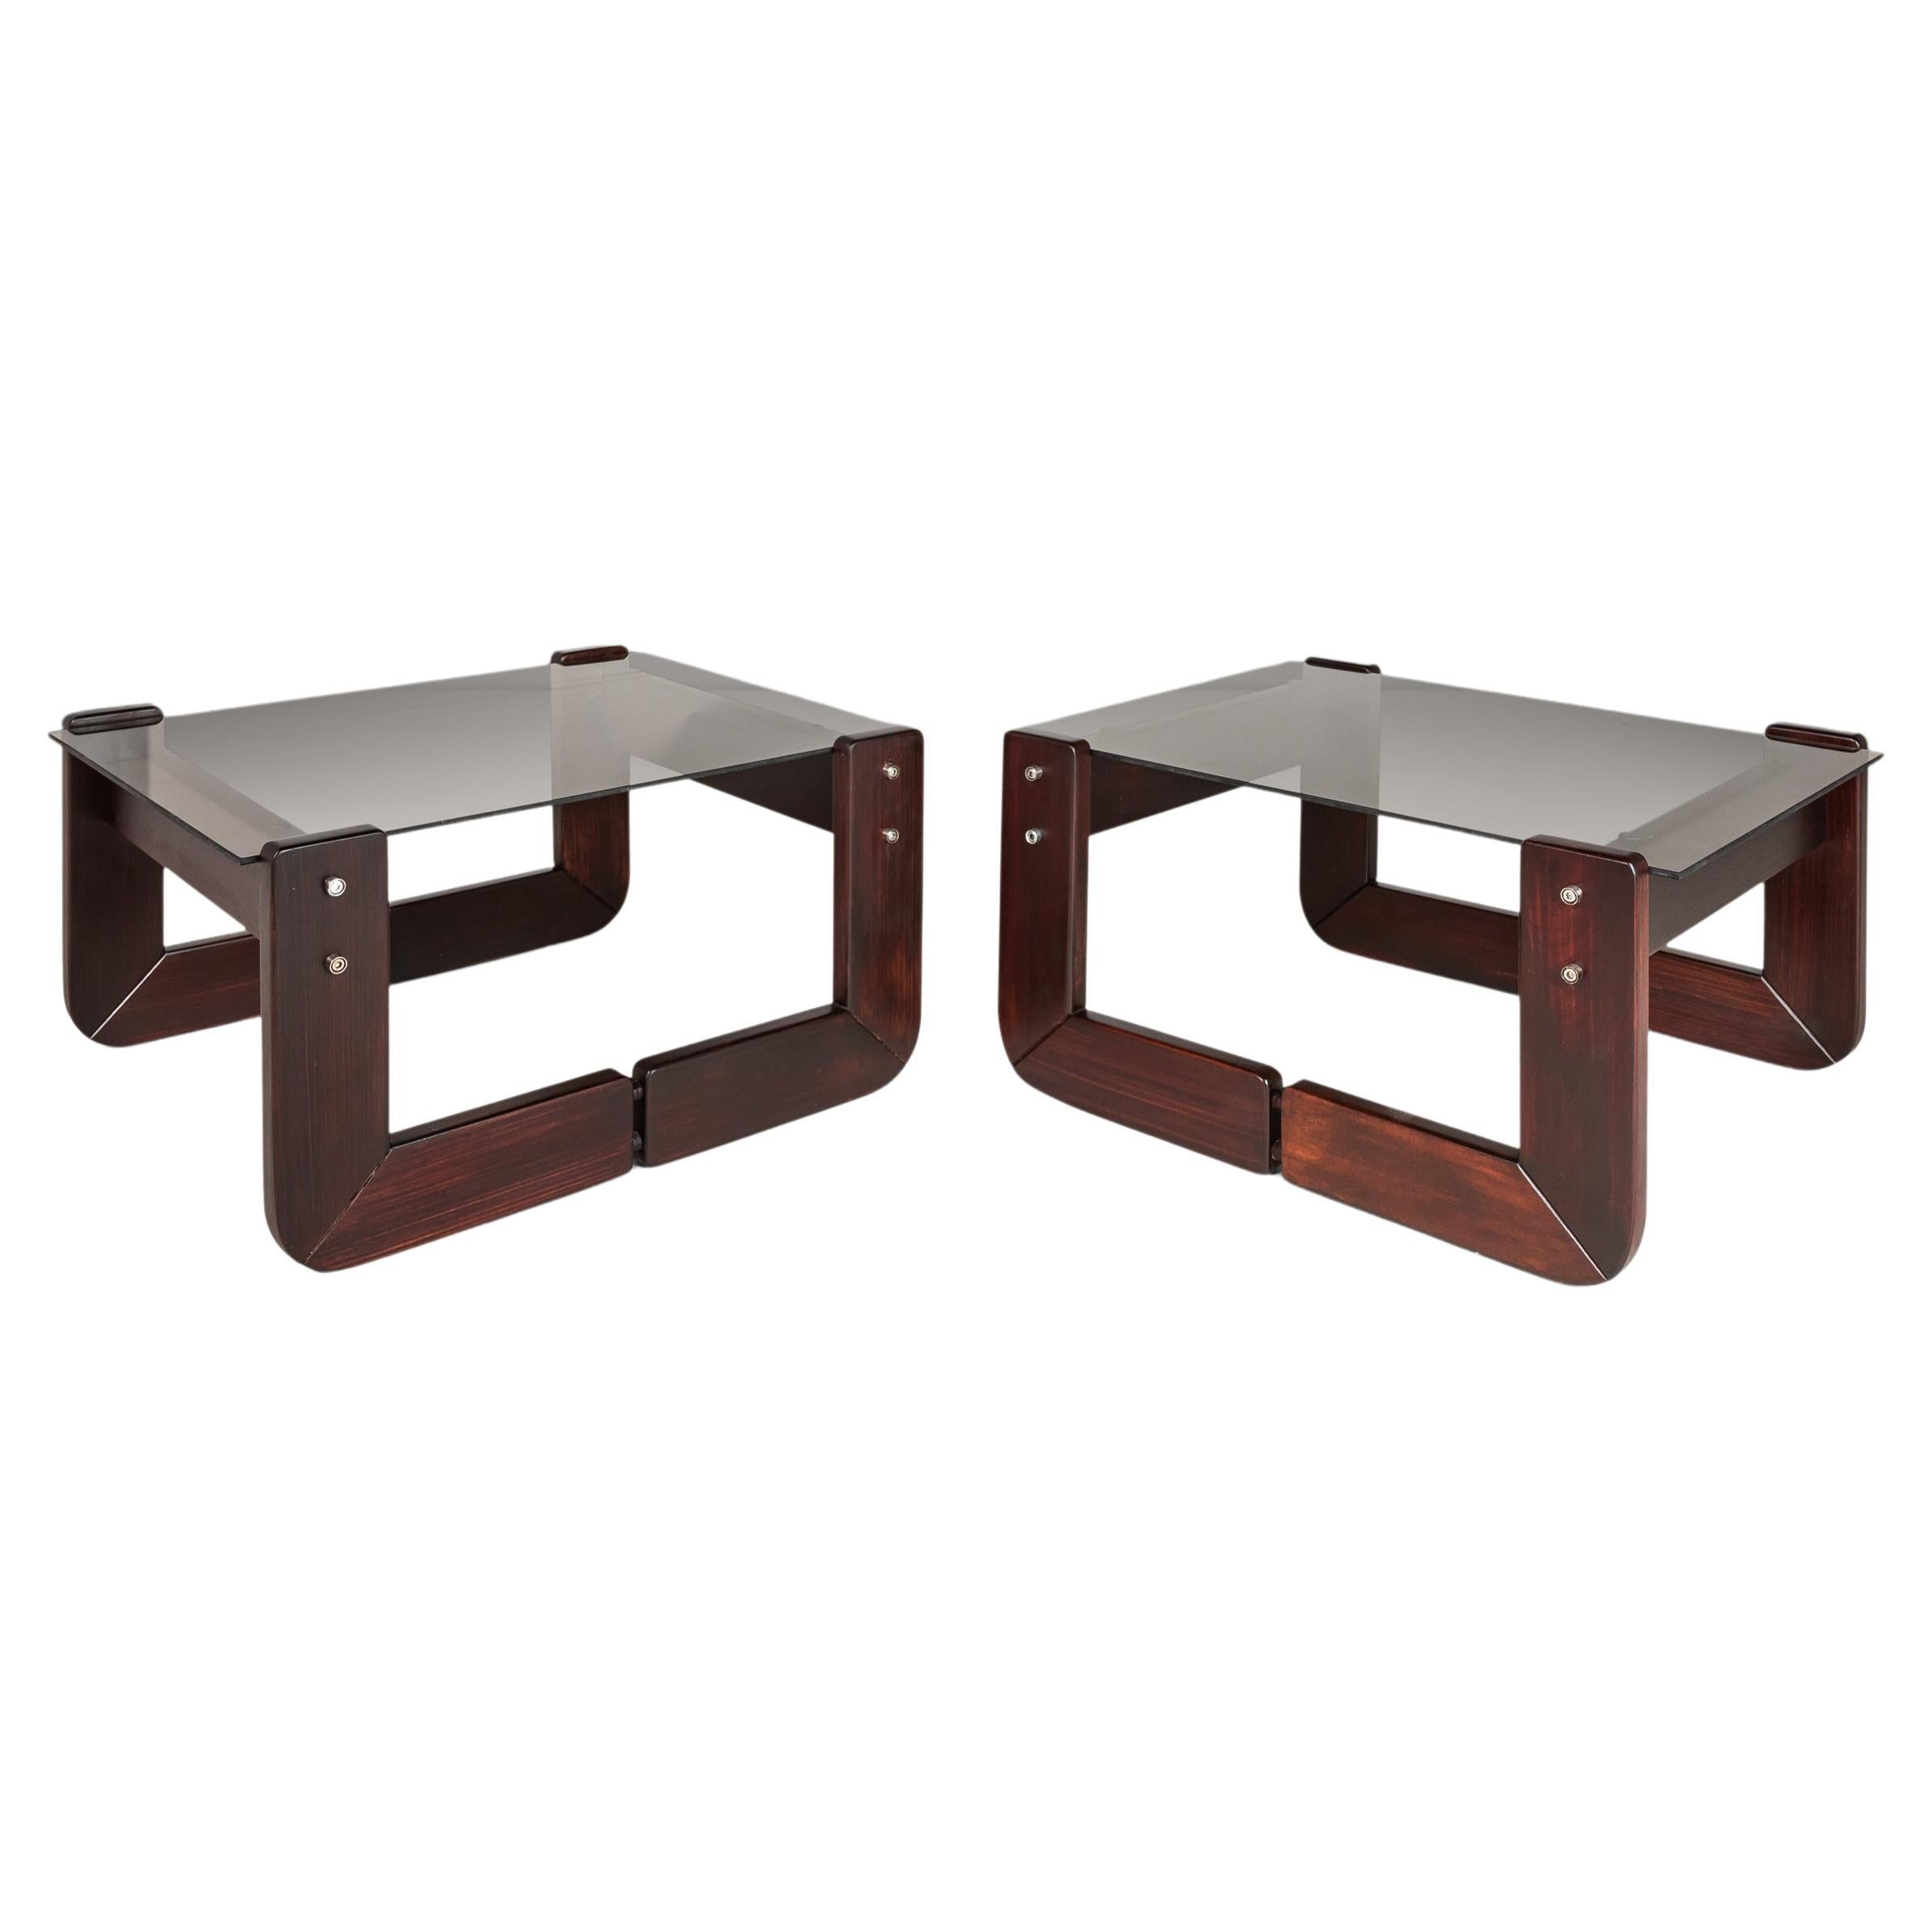 Set of Two '2' End Tables in Jacaranda by Percival Lafer, Brazil, circa 1970s